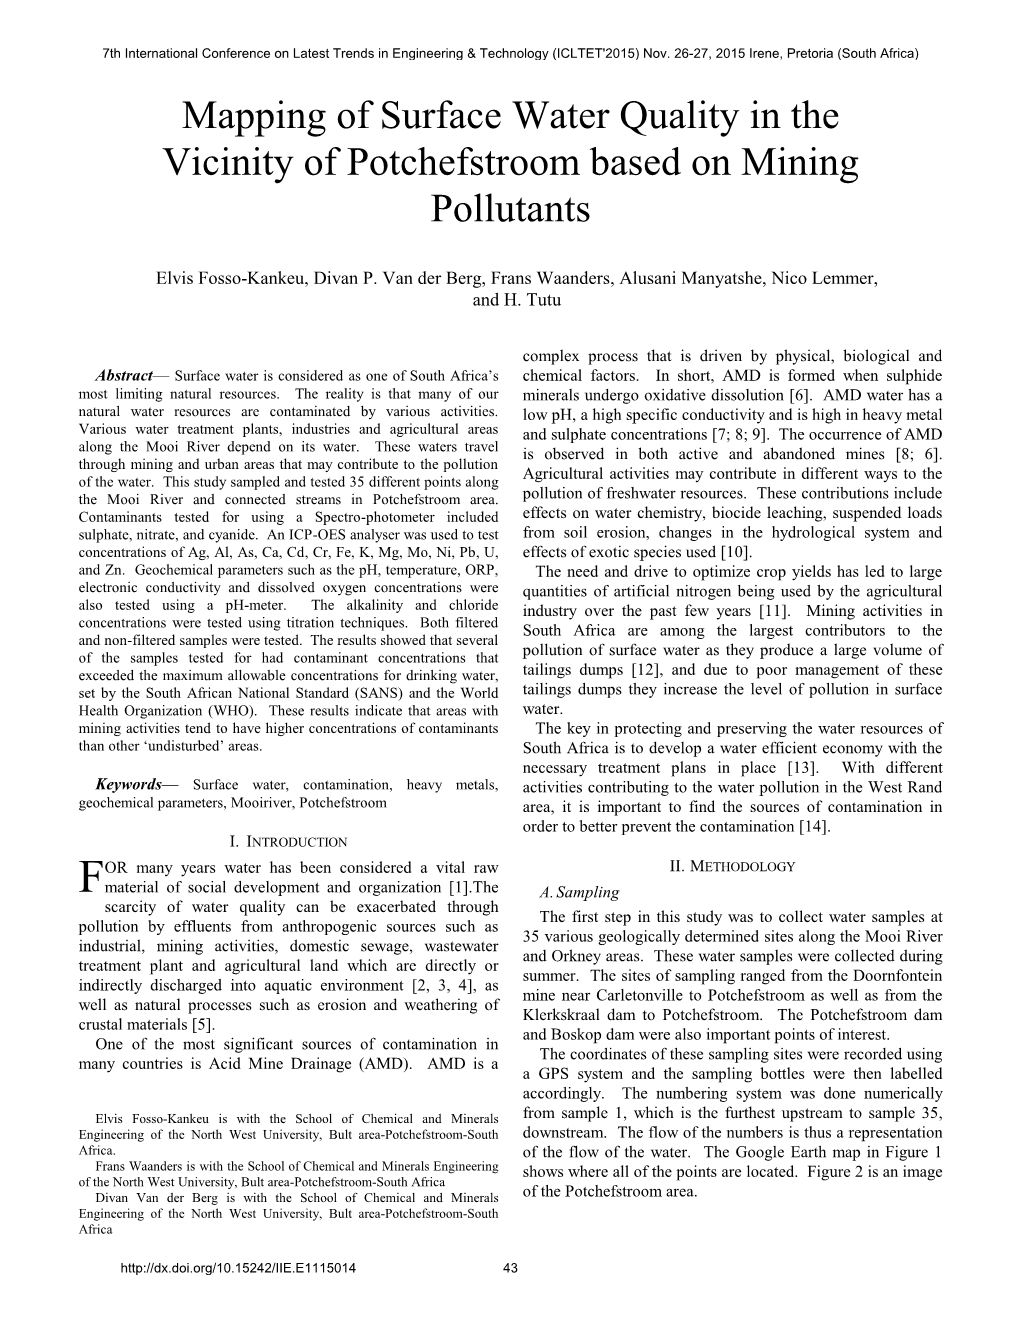 Mapping of Surface Water Quality in the Vicinity of Potchefstroom Based on Mining Pollutants